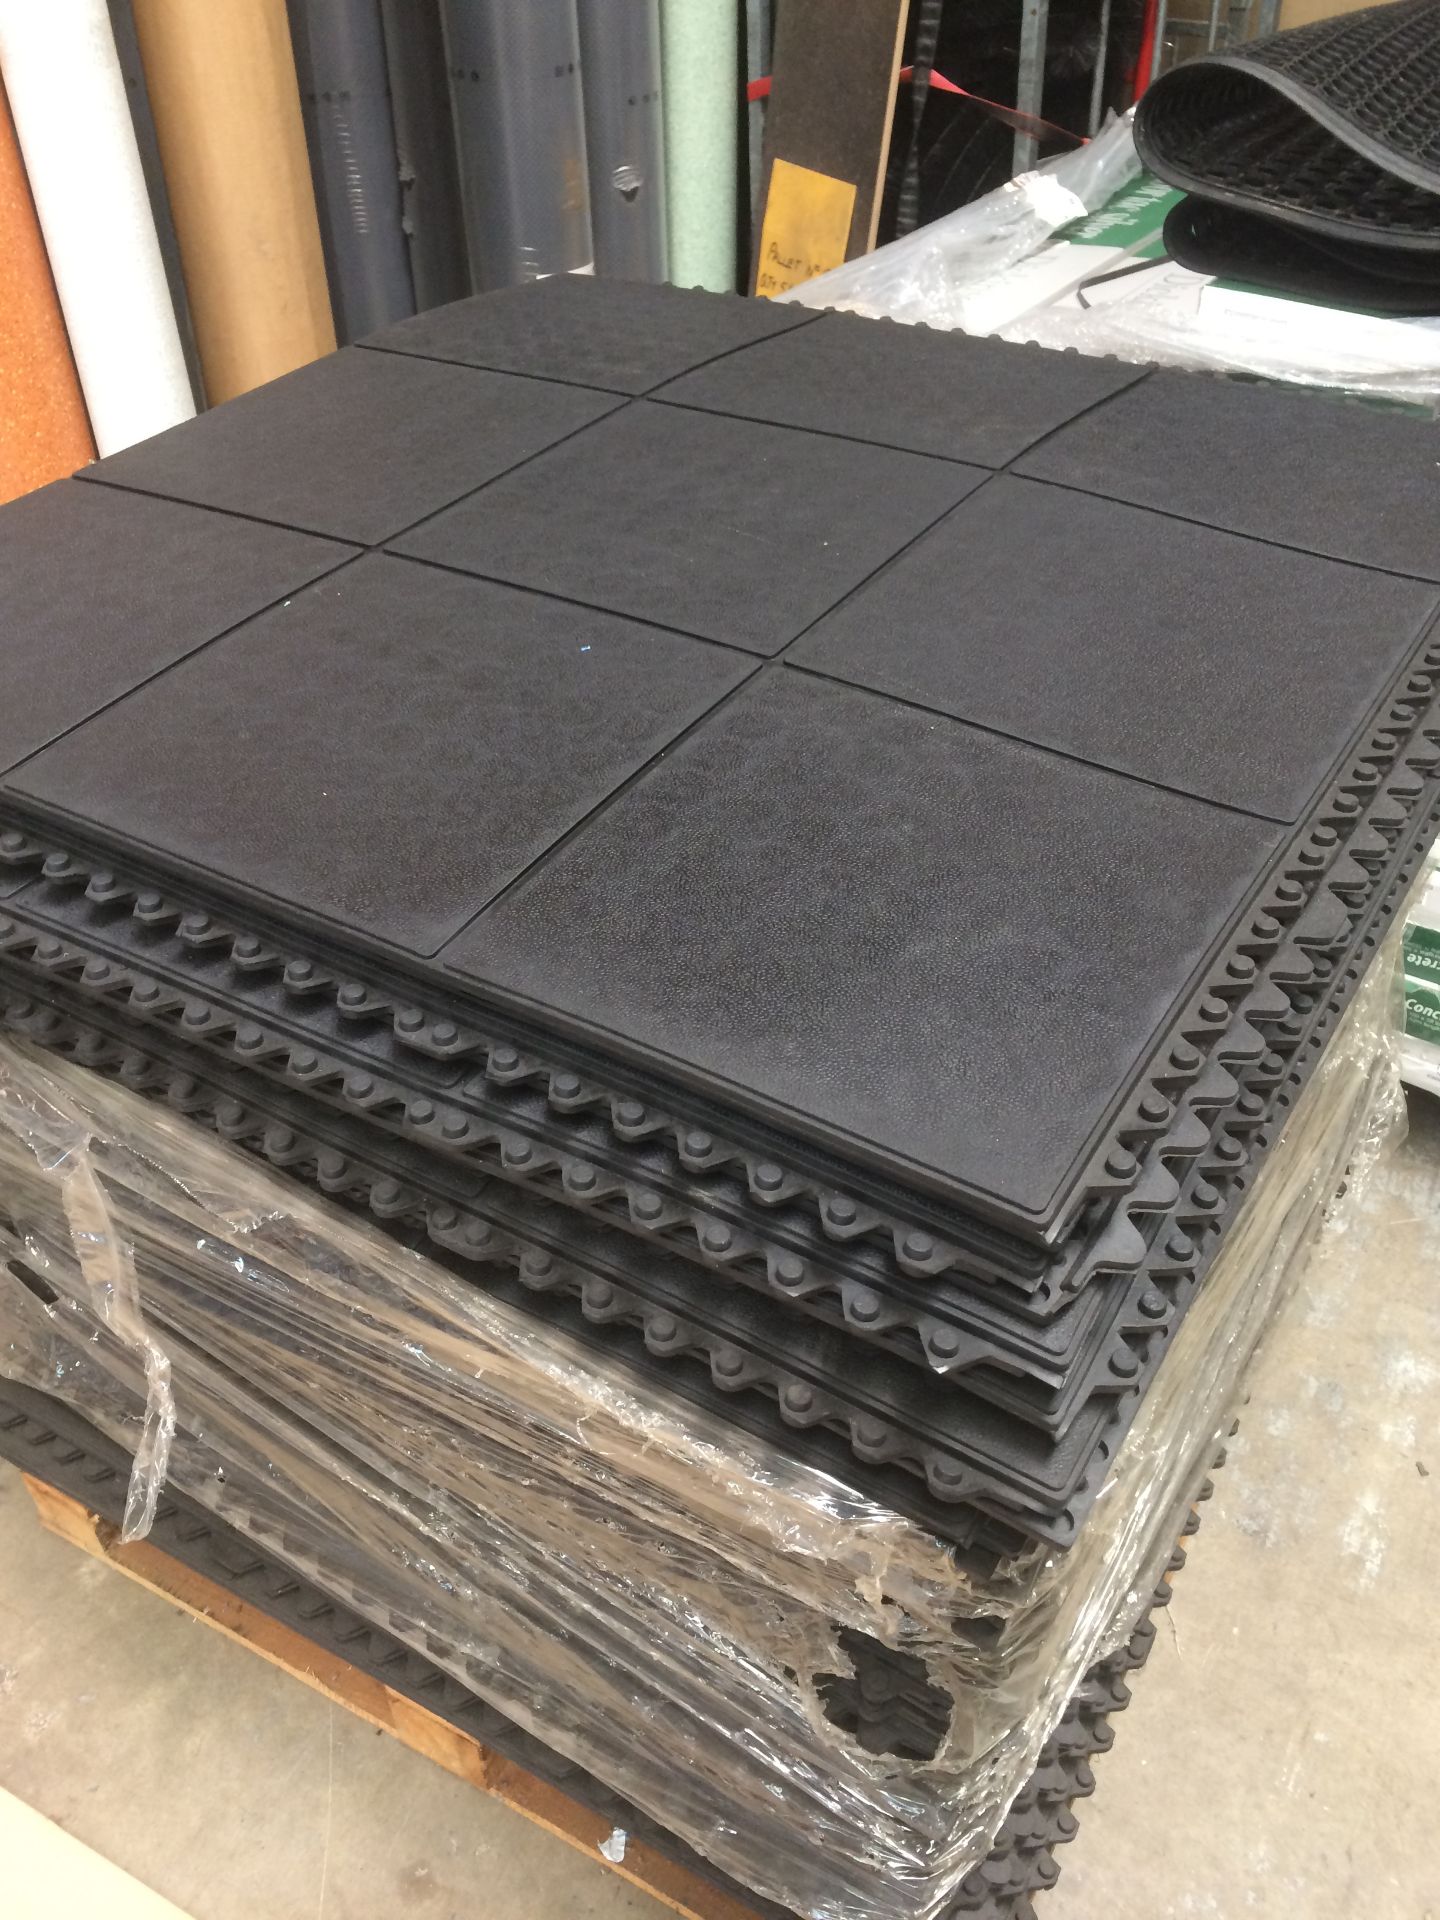 Rubber Gym Mats (9 mats per lot)

Interlocking heavy duty rubber mats specifically designed for - Image 2 of 2